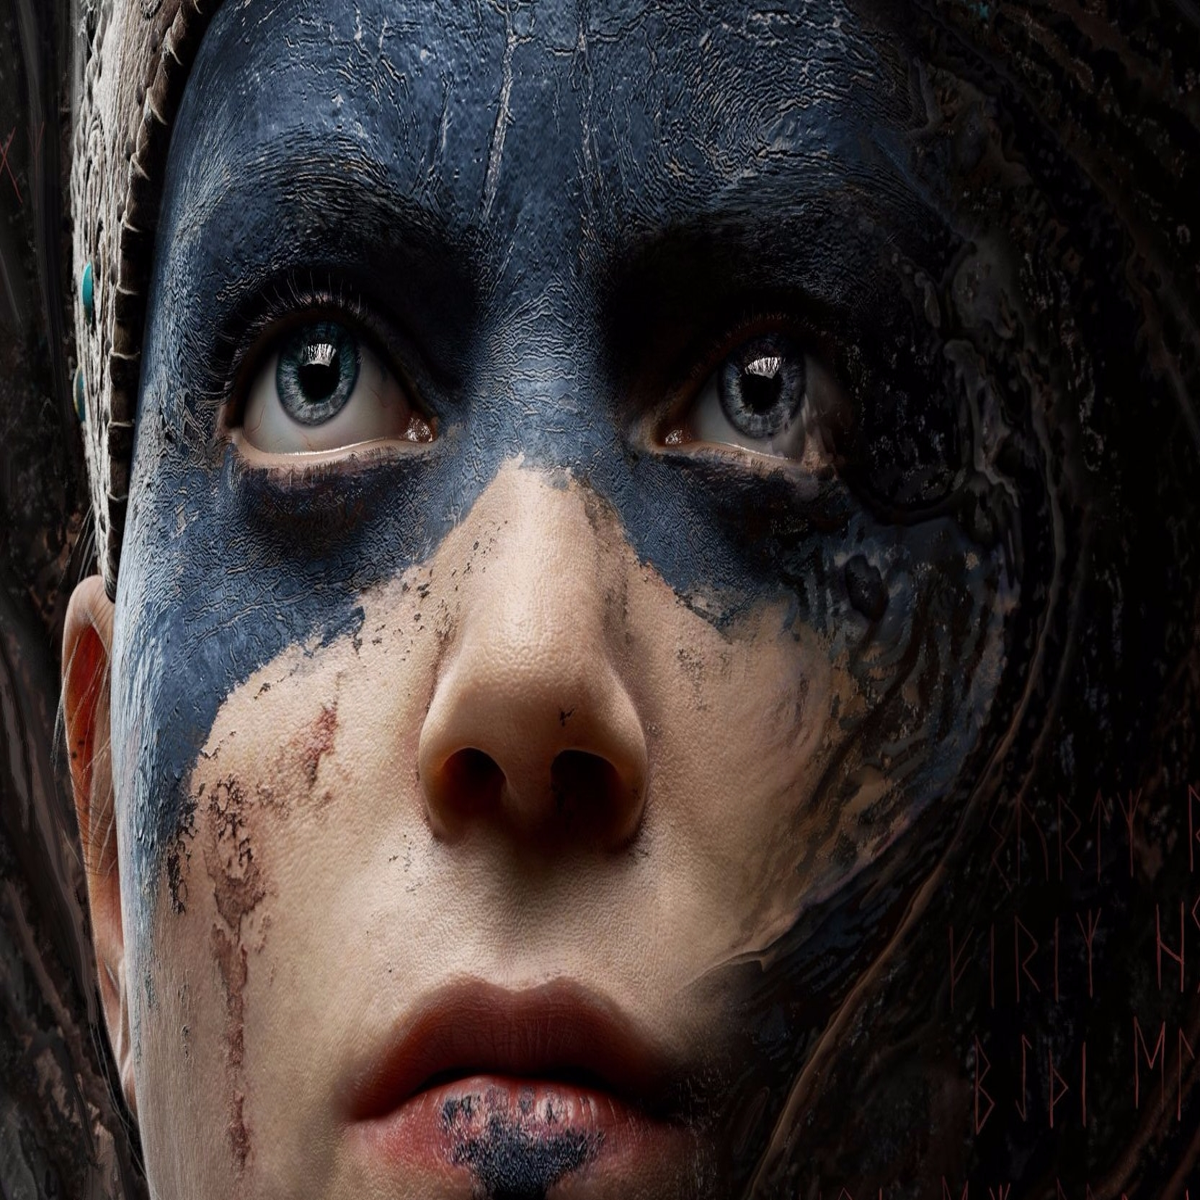 Beautiful New Hellblade 2 Trailer From Ninja Theory Features